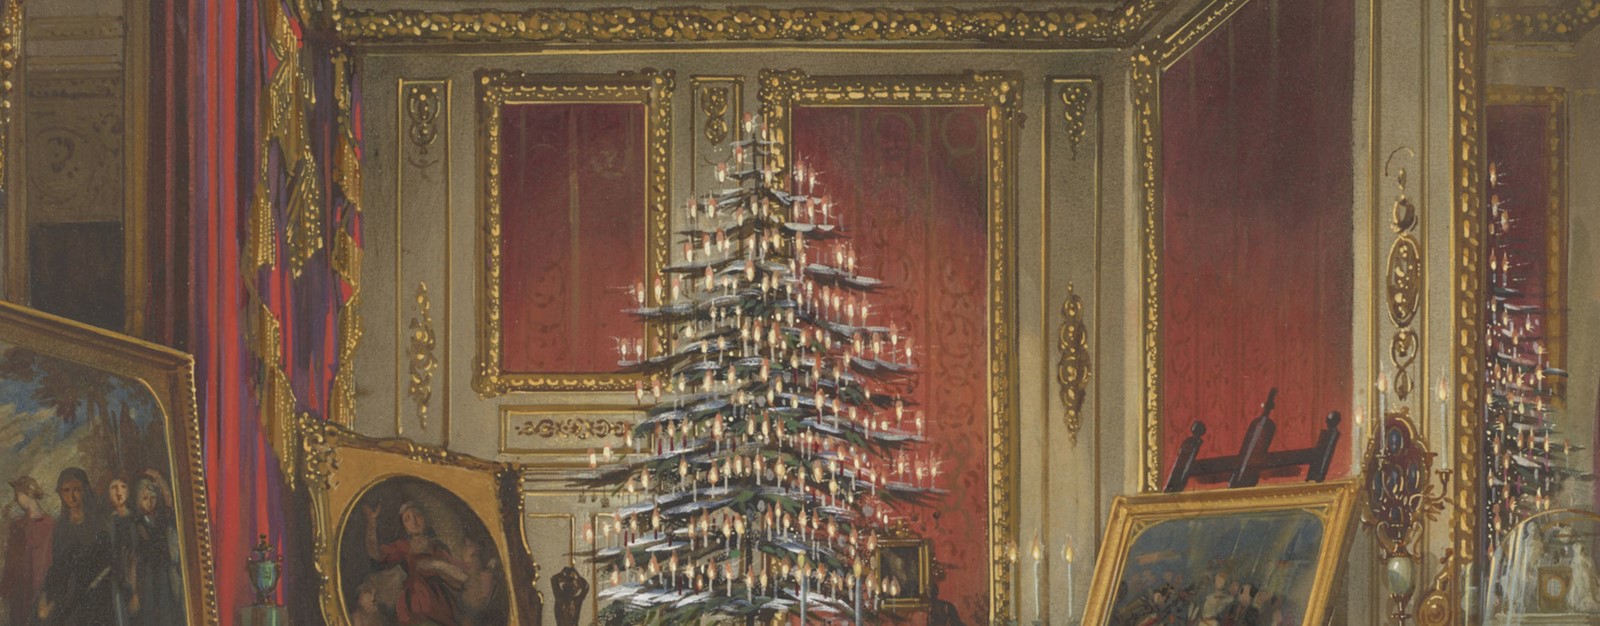 A watercolour painting of a Christmas tree